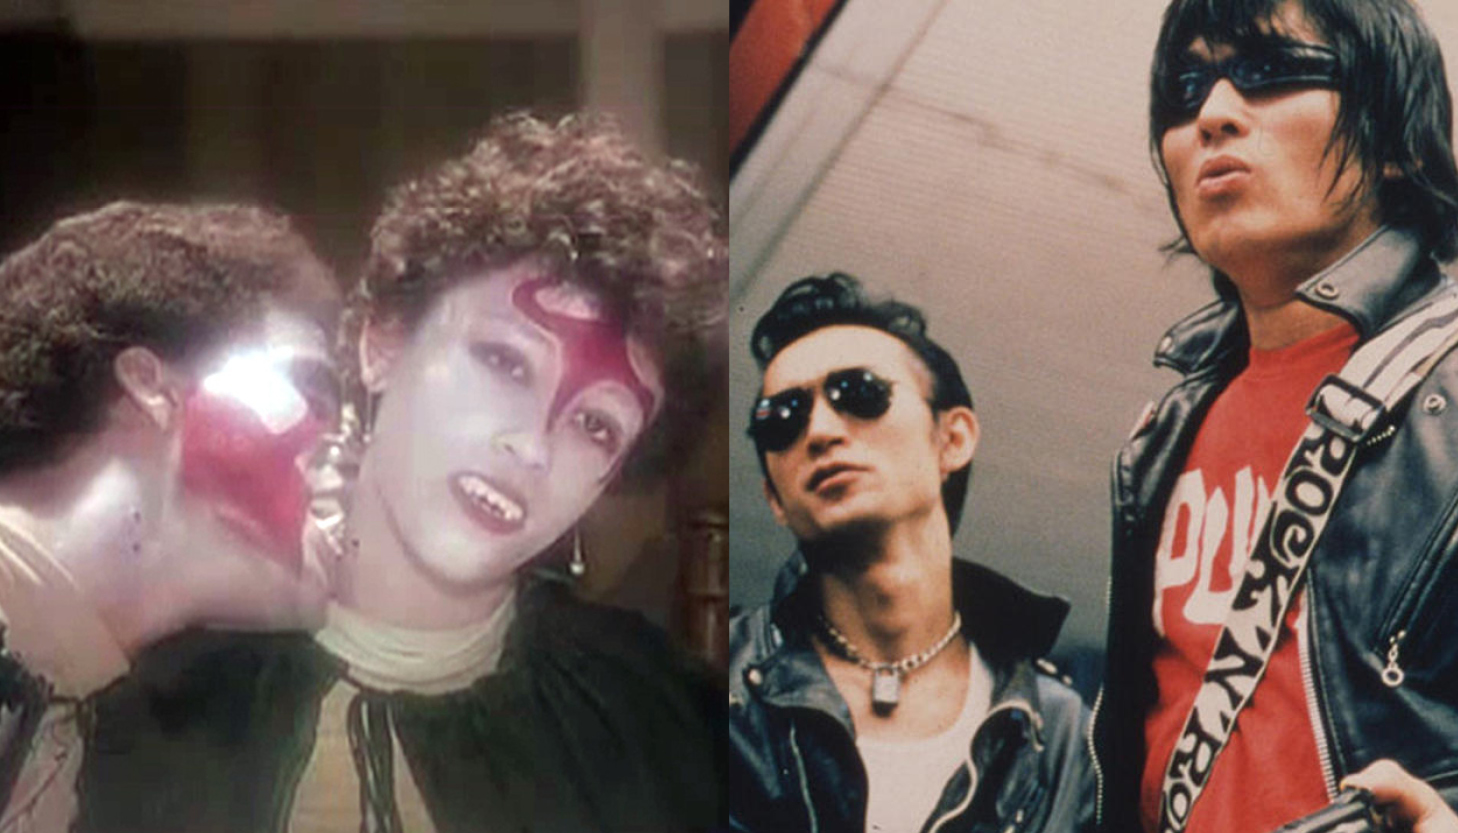 Stills from each Fangs and Wild Zero; one vampire bites another and two Ramones-style punk rockers.